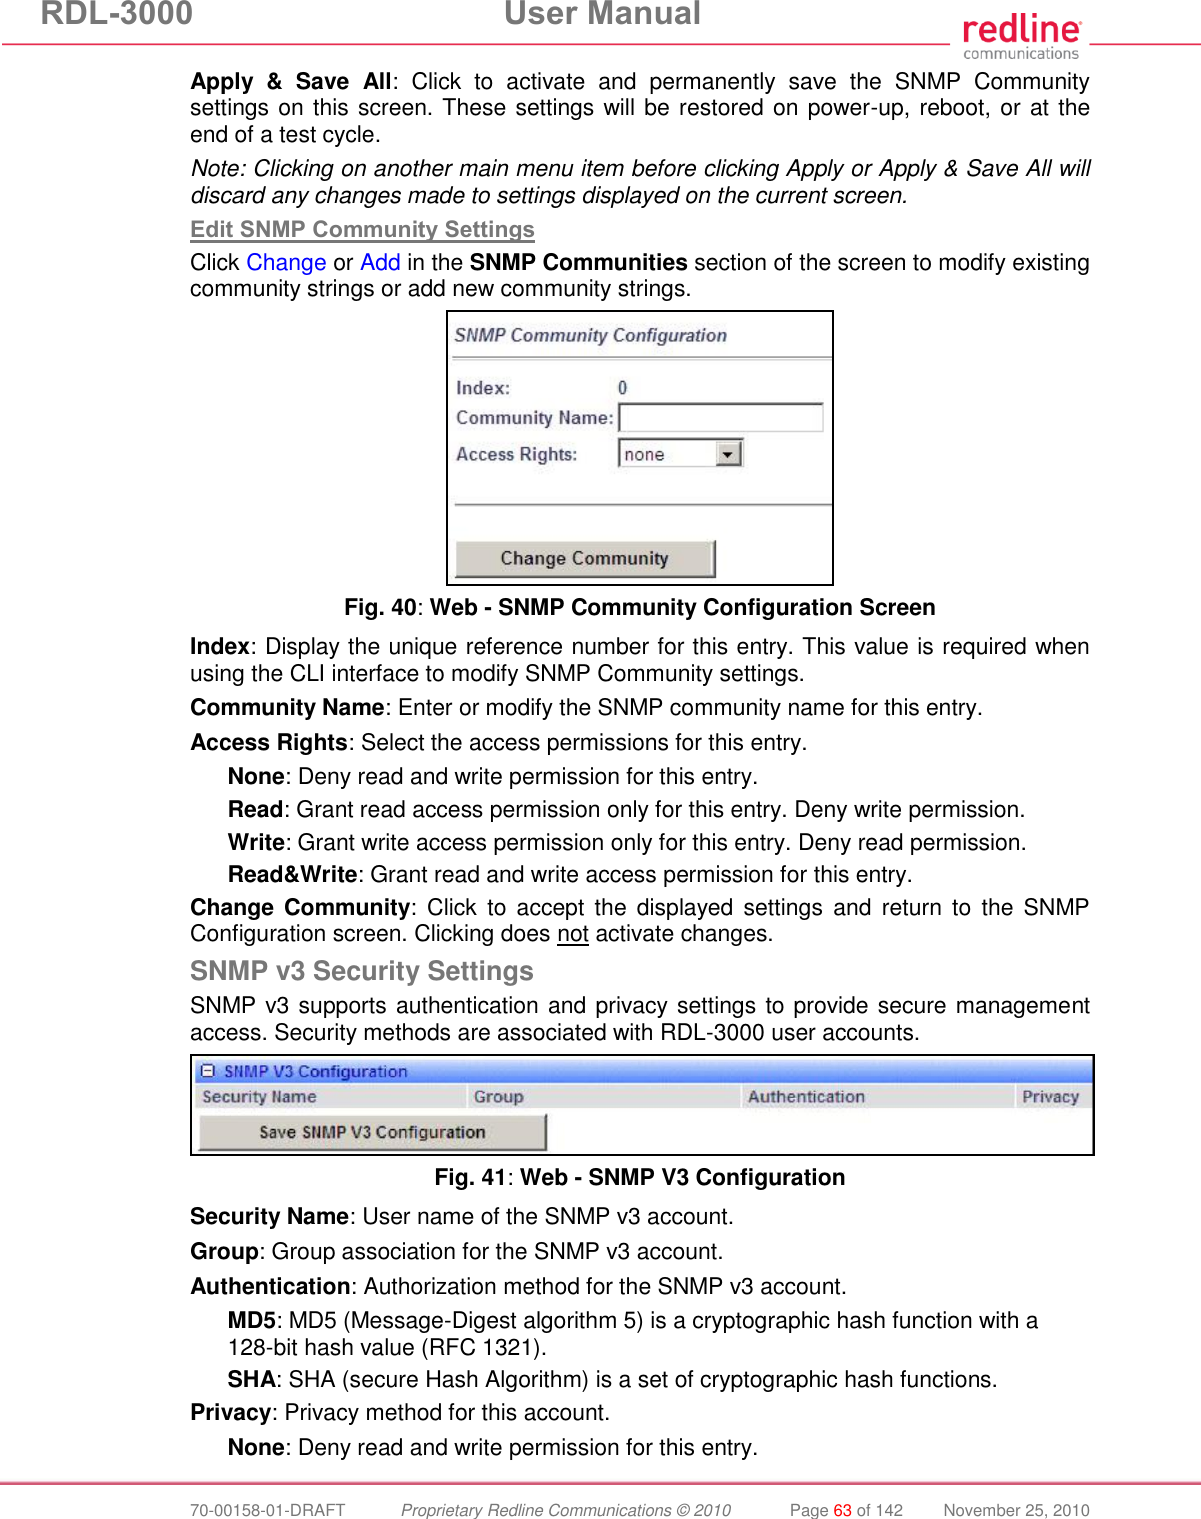 RDL-3000  User Manual  70-00158-01-DRAFT  Proprietary Redline Communications © 2010  Page 63 of 142  November 25, 2010 Apply  &amp;  Save  All:  Click  to  activate  and  permanently  save  the  SNMP  Community settings on this screen. These settings will be restored on power-up, reboot, or at the end of a test cycle. Note: Clicking on another main menu item before clicking Apply or Apply &amp; Save All will discard any changes made to settings displayed on the current screen. Edit SNMP Community Settings Click Change or Add in the SNMP Communities section of the screen to modify existing community strings or add new community strings.  Fig. 40: Web - SNMP Community Configuration Screen Index: Display the unique reference number for this entry. This value is required when using the CLI interface to modify SNMP Community settings. Community Name: Enter or modify the SNMP community name for this entry. Access Rights: Select the access permissions for this entry. None: Deny read and write permission for this entry. Read: Grant read access permission only for this entry. Deny write permission. Write: Grant write access permission only for this entry. Deny read permission. Read&amp;Write: Grant read and write access permission for this entry. Change Community:  Click  to  accept  the  displayed settings  and  return  to  the  SNMP Configuration screen. Clicking does not activate changes. SNMP v3 Security Settings SNMP v3 supports authentication and privacy settings to provide secure management access. Security methods are associated with RDL-3000 user accounts.  Fig. 41: Web - SNMP V3 Configuration Security Name: User name of the SNMP v3 account. Group: Group association for the SNMP v3 account. Authentication: Authorization method for the SNMP v3 account. MD5: MD5 (Message-Digest algorithm 5) is a cryptographic hash function with a 128-bit hash value (RFC 1321). SHA: SHA (secure Hash Algorithm) is a set of cryptographic hash functions. Privacy: Privacy method for this account. None: Deny read and write permission for this entry. 